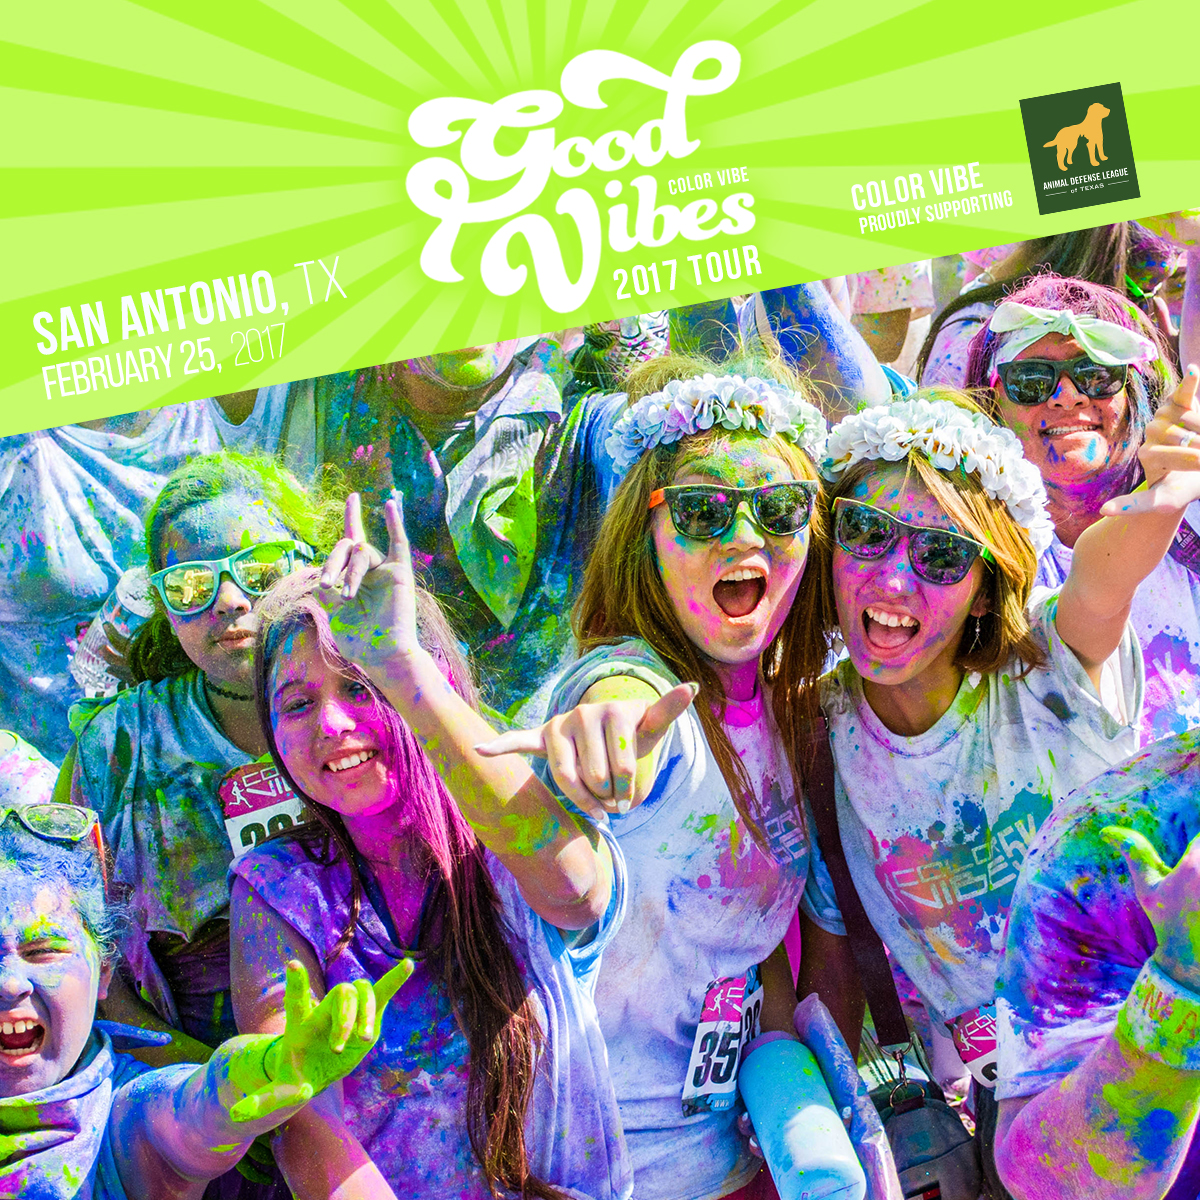 San Antonio Color Vibe 5K proudly supports the Animal Defense League of Texas